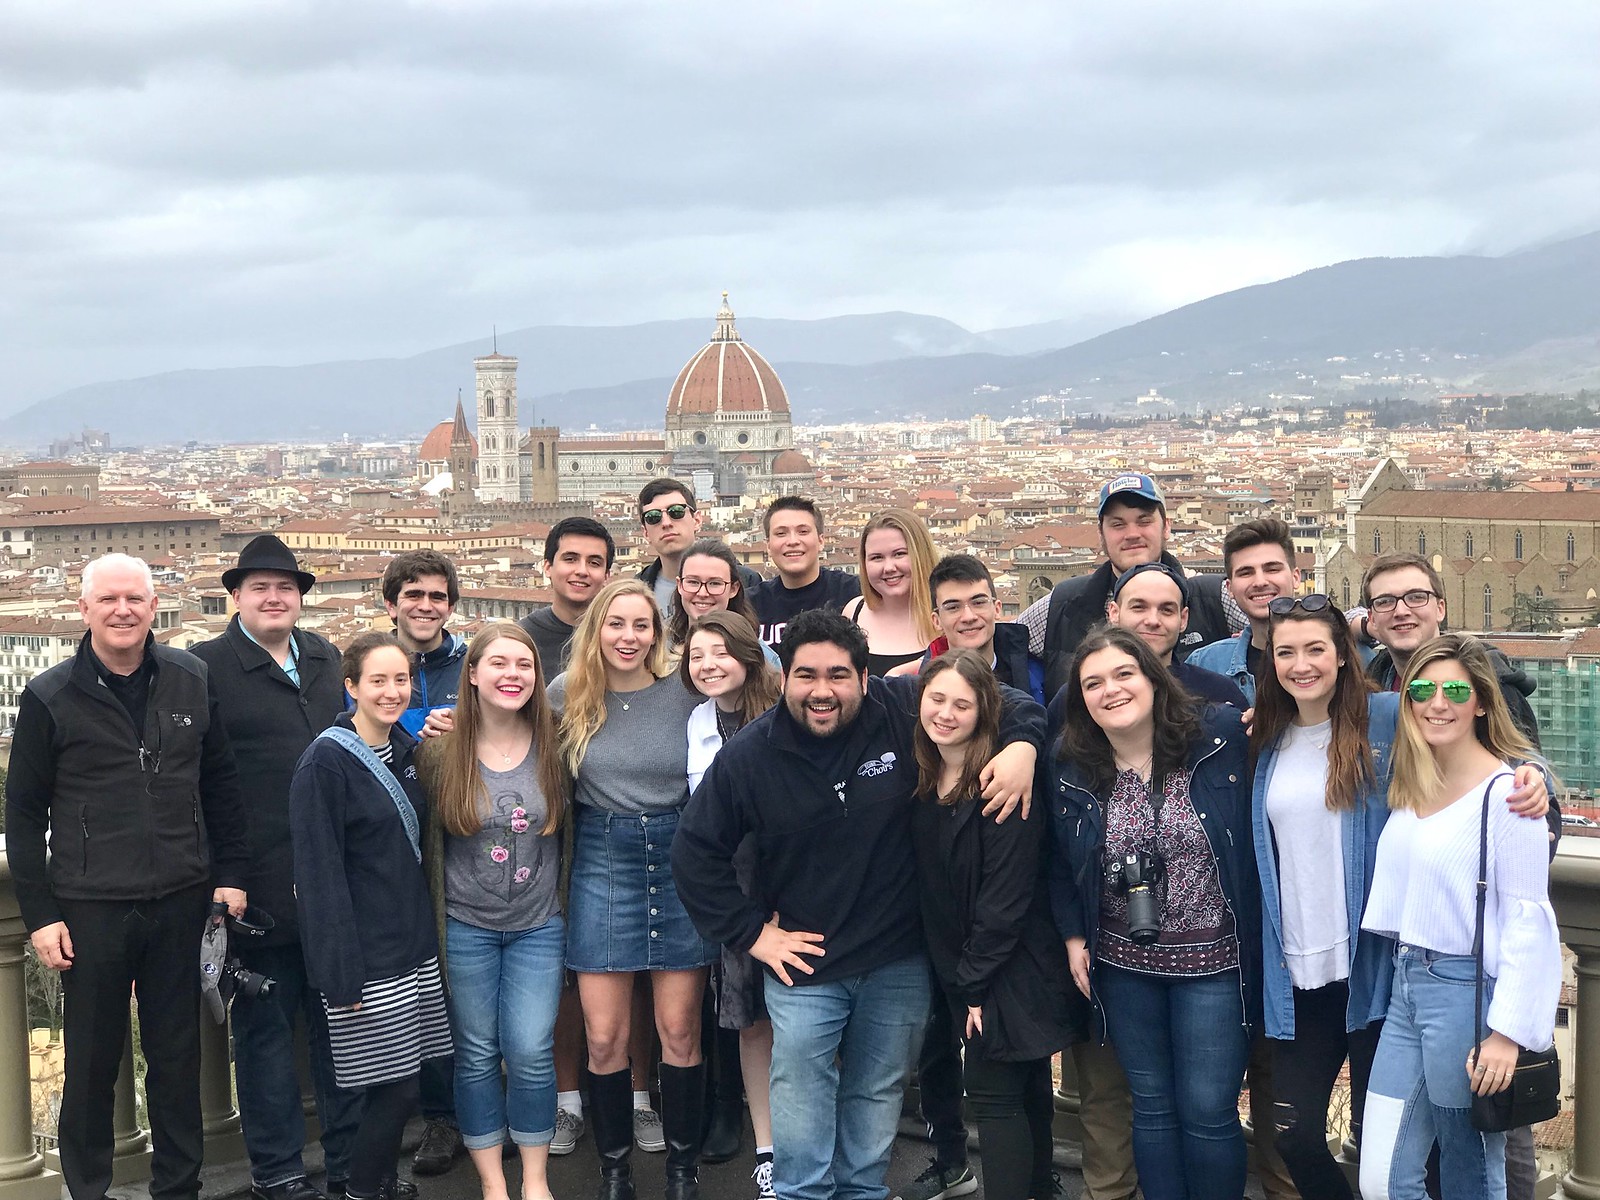 The UConn Chamber Singers and Dr. Spillane on the hill overlooking Florence